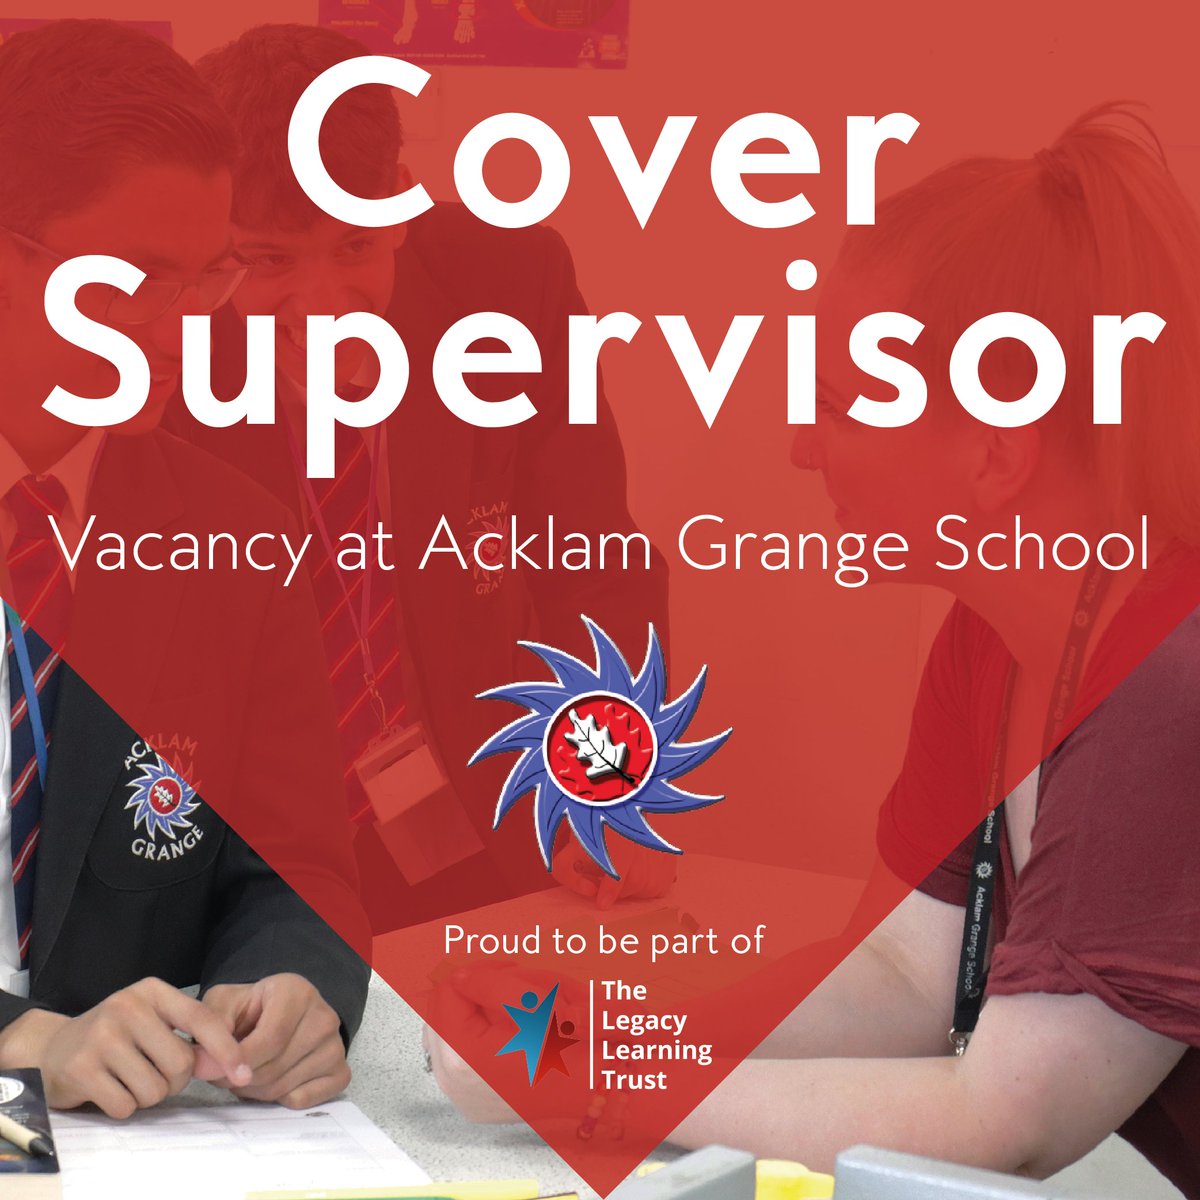 Cover Supervisor vacancy at Acklam Grange School Acklam Grange are looking to appoint an enthusiastic and hardworking individual to complement their team of existing Cover Supervisors. ➡️ thelegacylearningtrust.org.uk/current-career…